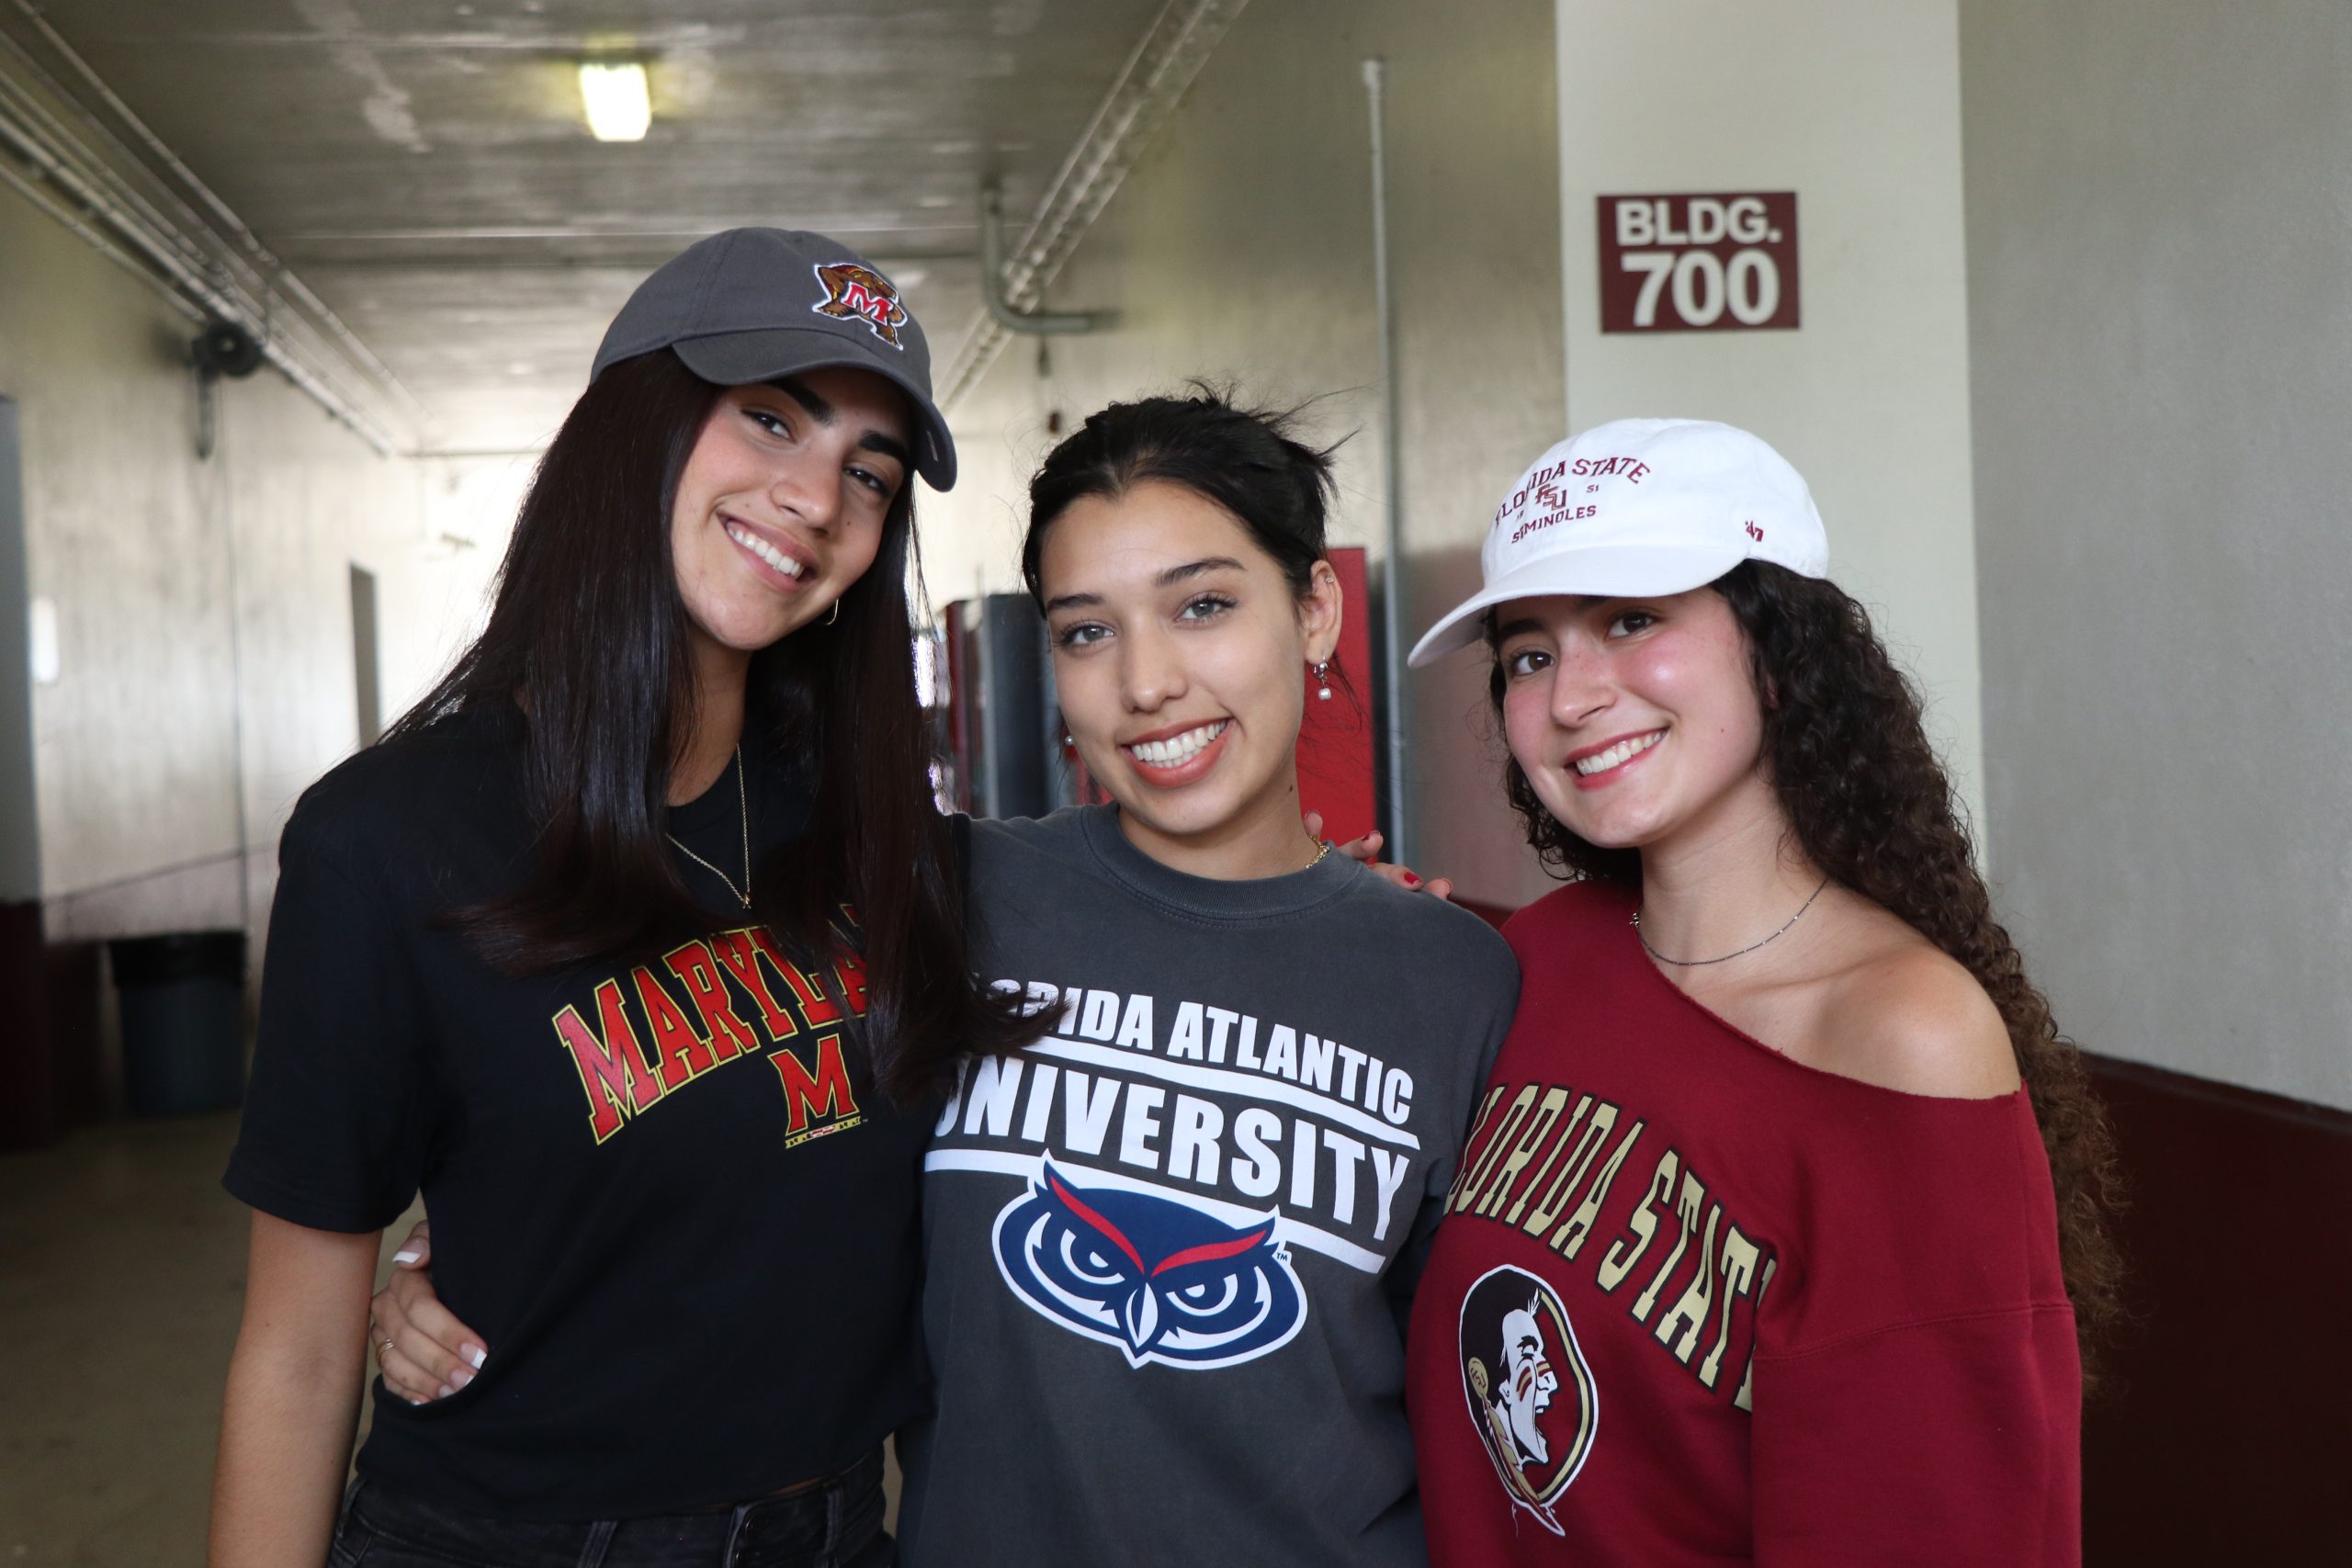 Senior Class Senator Alya Abufele, Senior Class President Renata Garcia and Senior Class Vice President Gabriella Fayad show off their college commitments. April 27, was the unofficial college commitment day at Marjory Stoneman Douglas High School, where the Seniors wore their college attire.